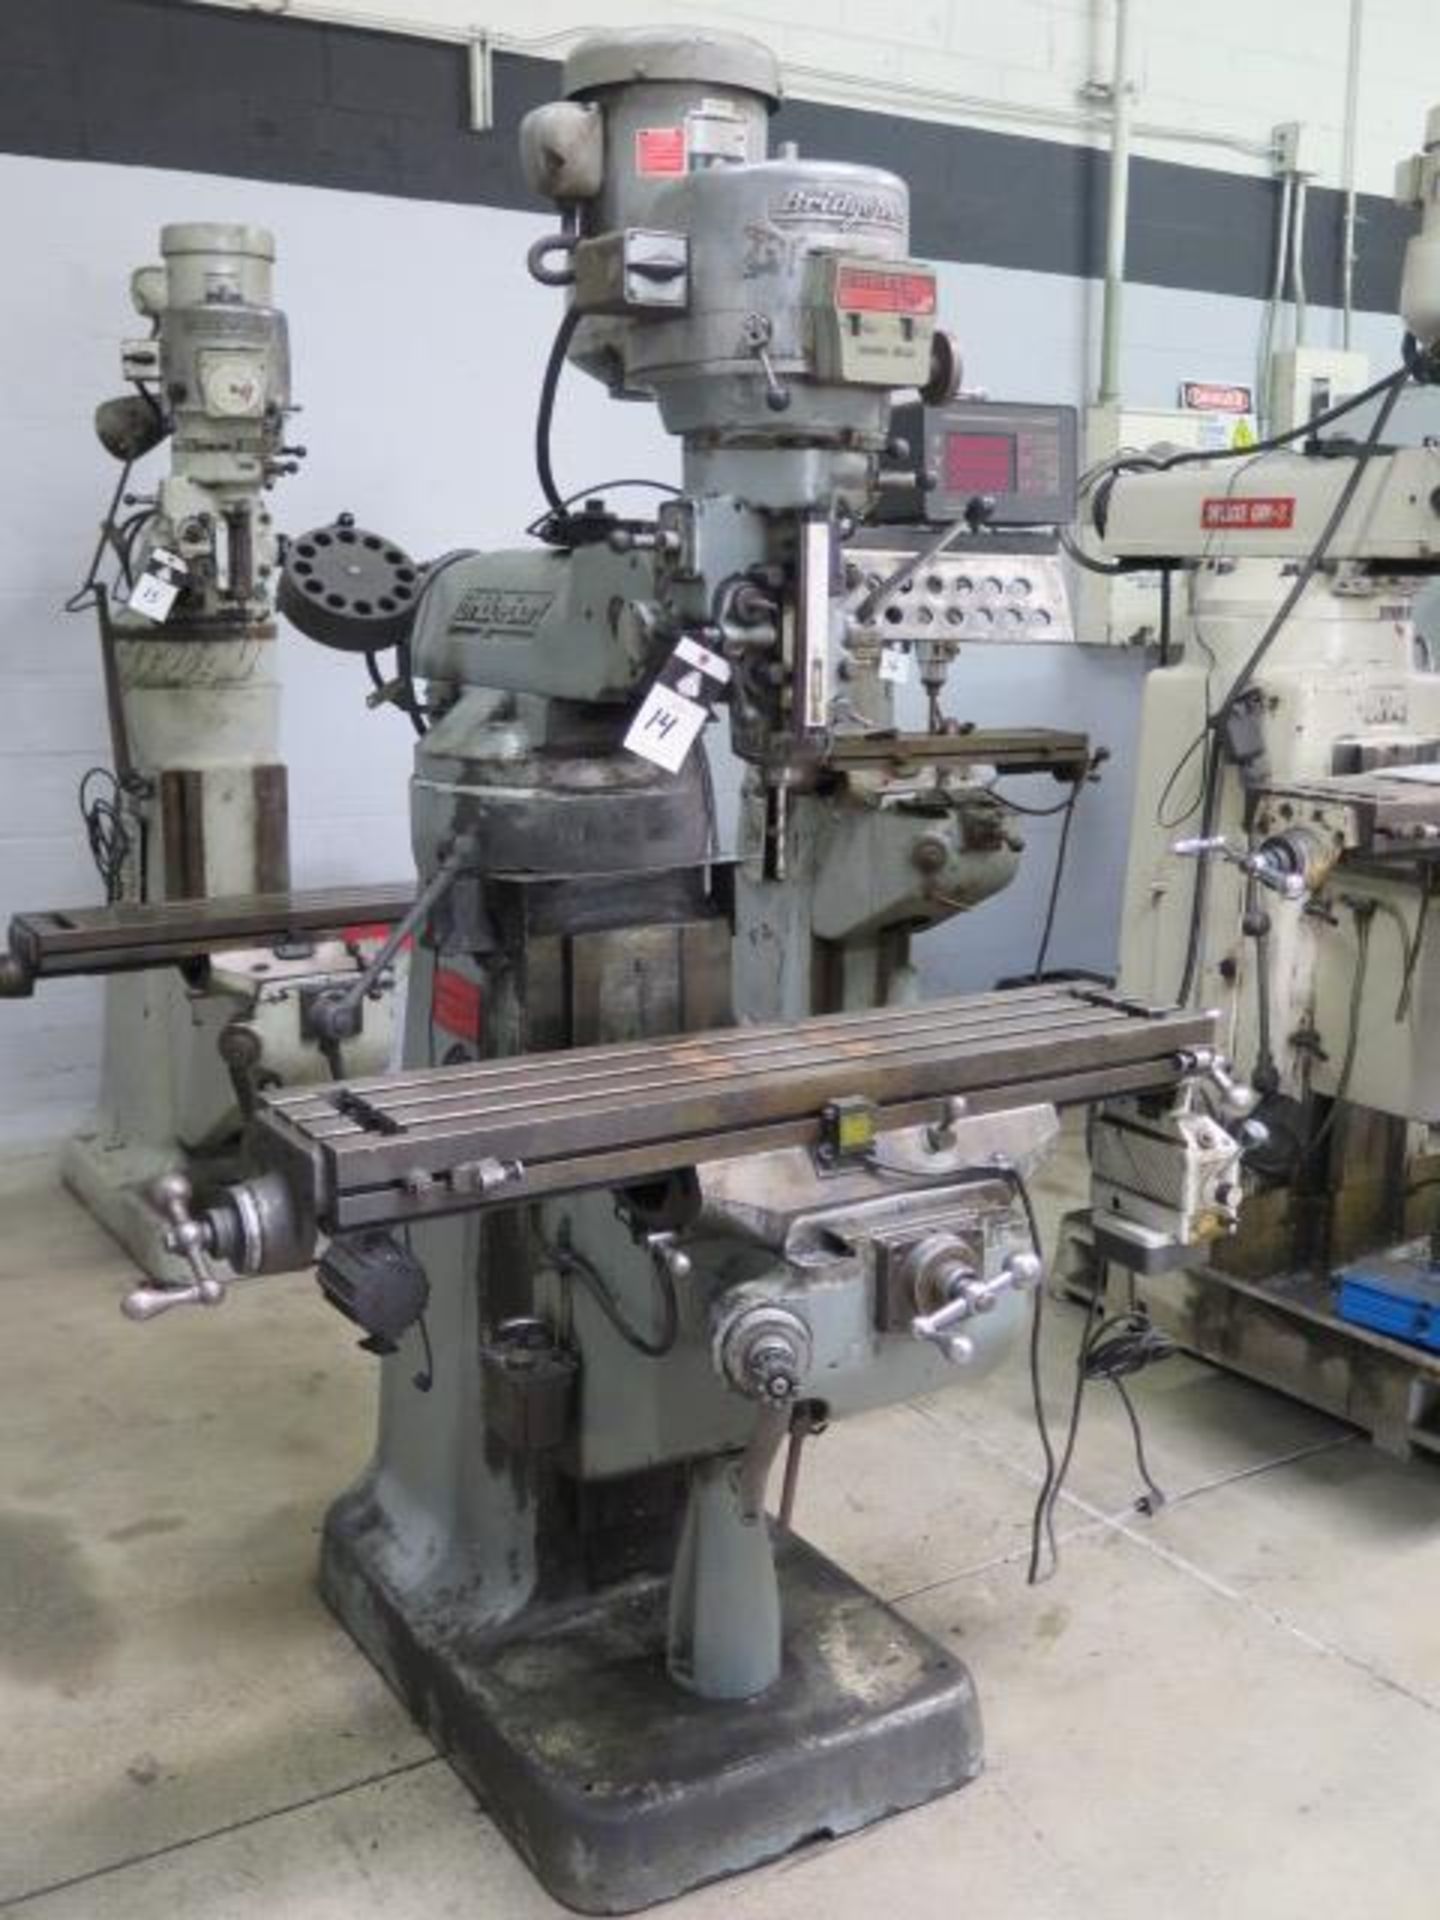 Bridgeport Series 1 – 2Hp Vertical Mill w/ Sargon 3-Axis DRO, 60-4200 Dial RPM, SOLD AS IS - Image 2 of 12